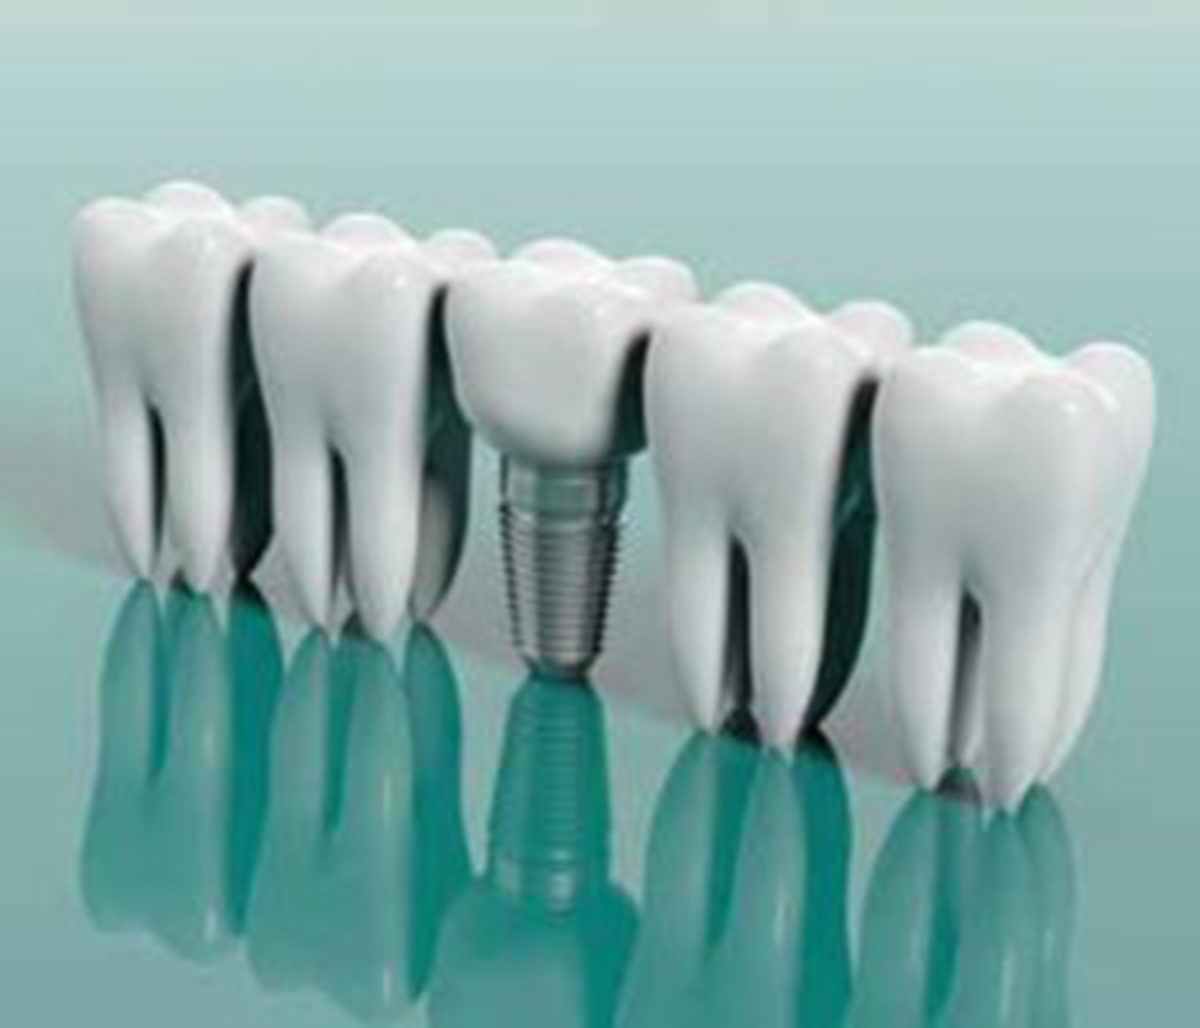 At West Portal Family Dentistry, team of professionals provide restorative dentistry solutions such as dental implants to provide patients in and around San Francisco, CA